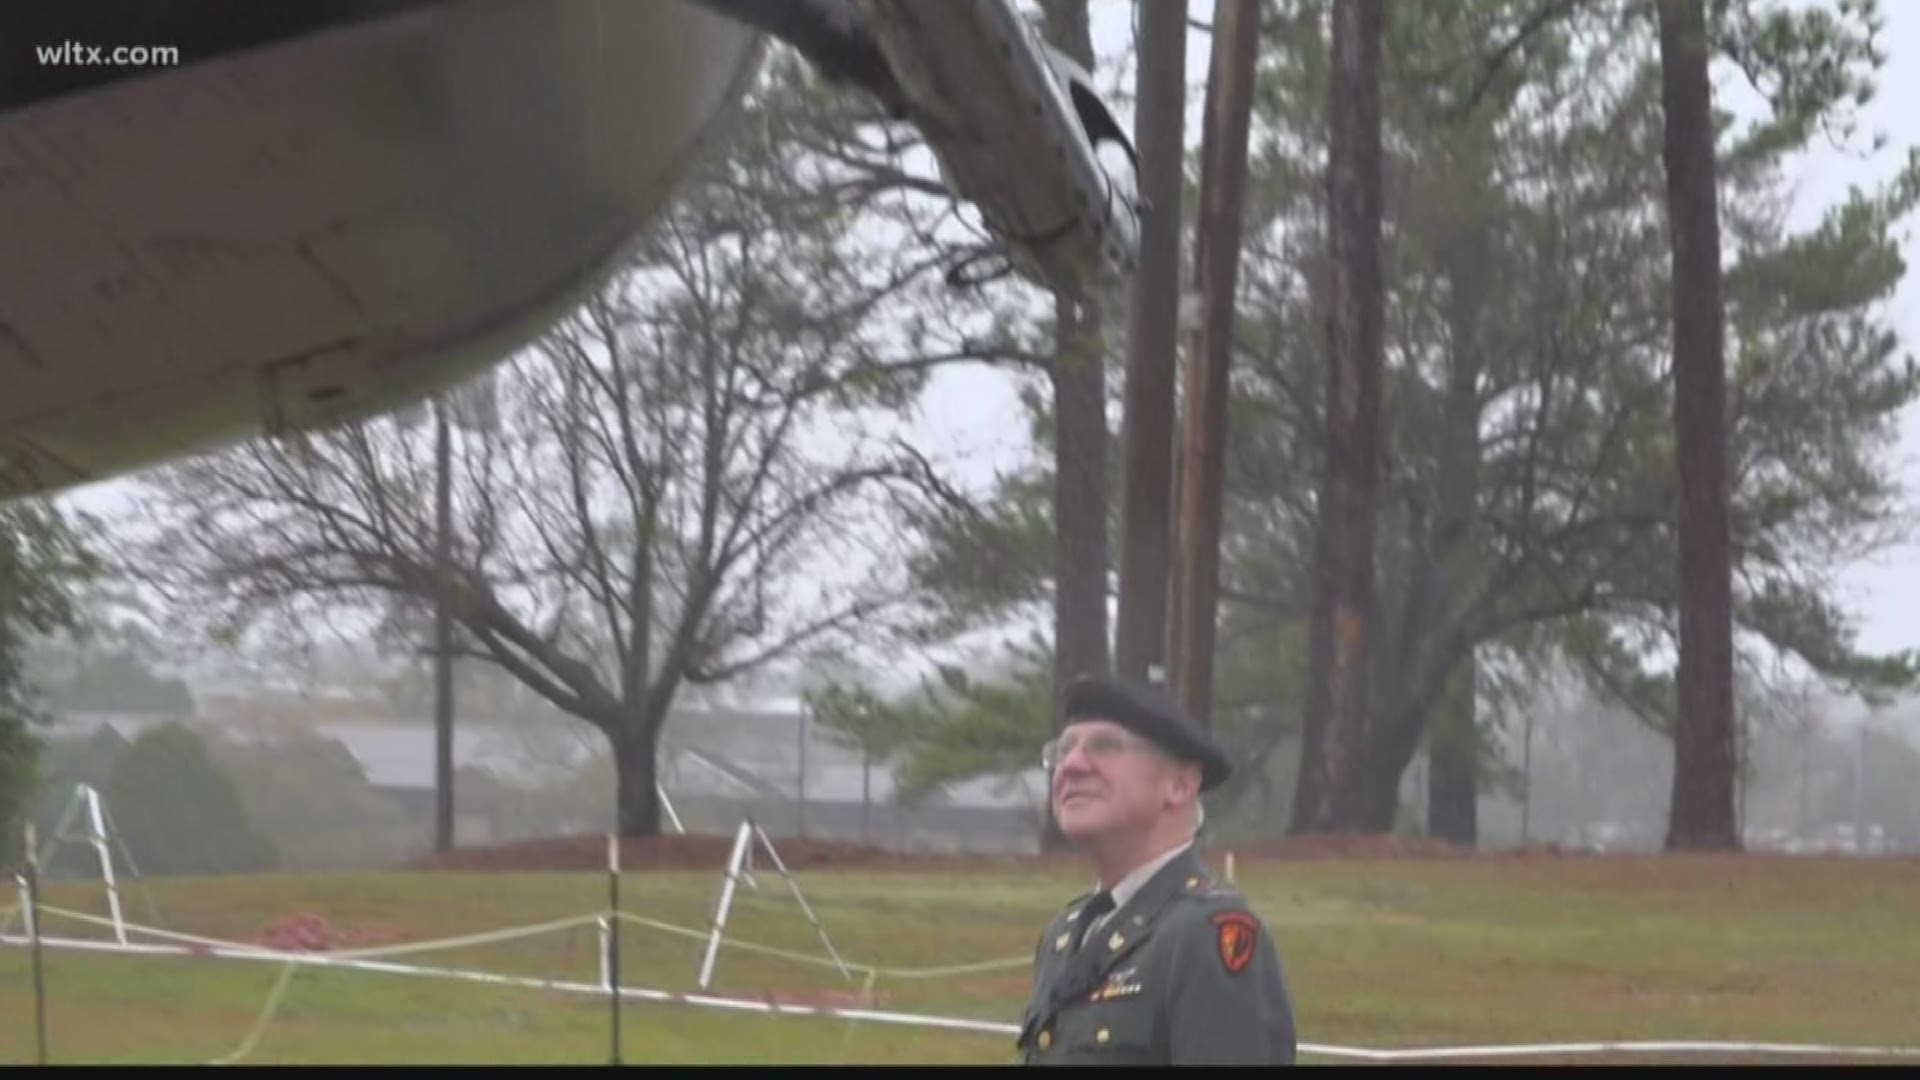 A Vietnam veteran has reunited with the helicopter he flew more than 50 years ago.